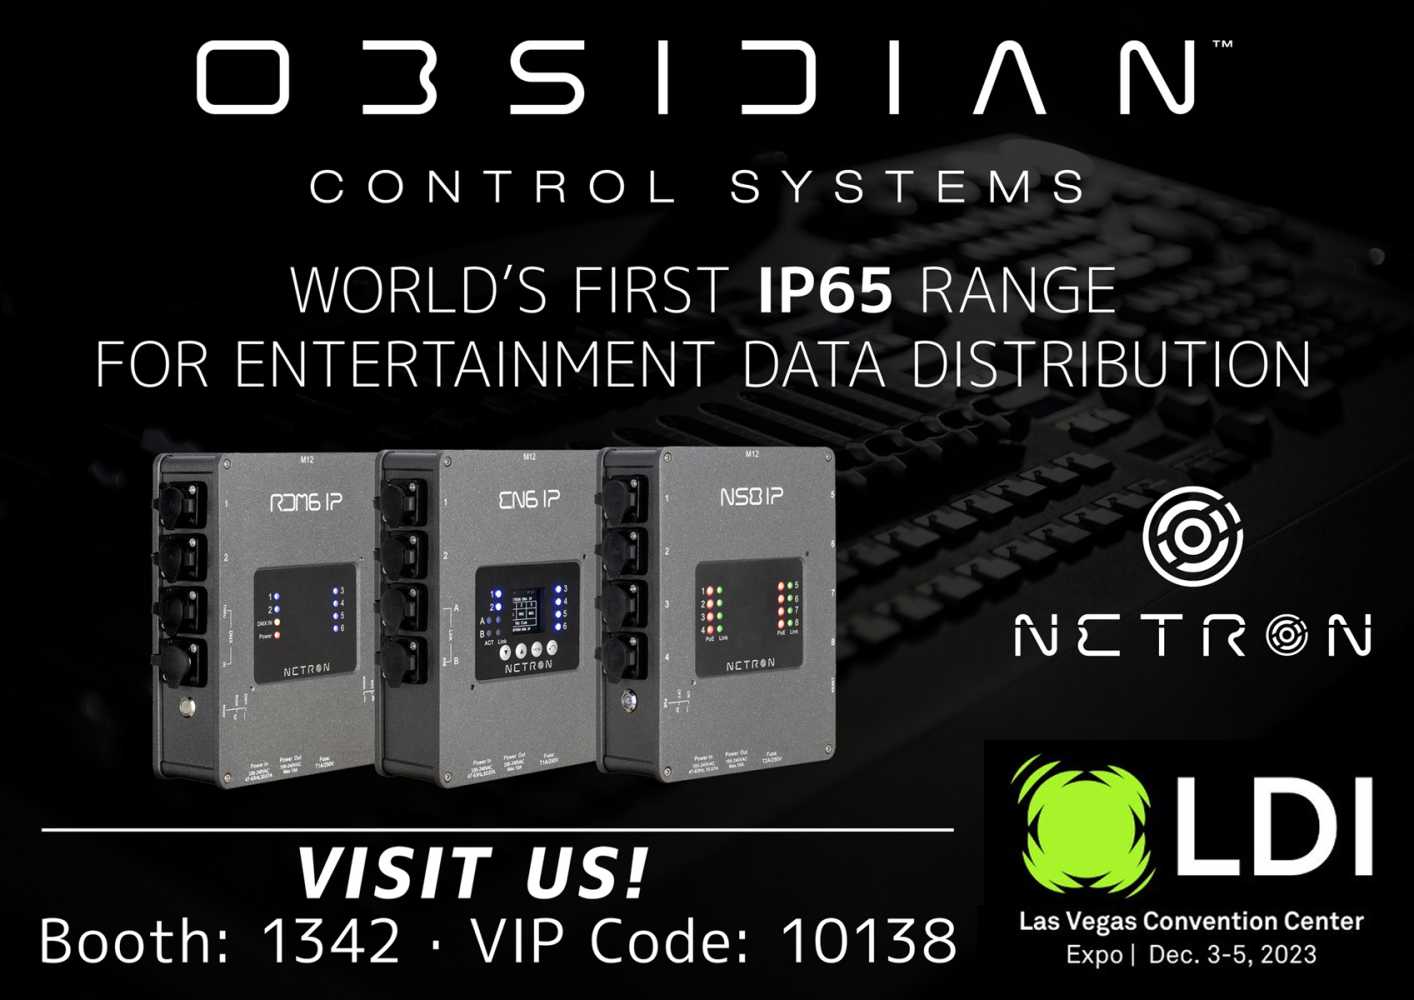 Obsidian is launching a comprehensive line of Netron products in smart form factors